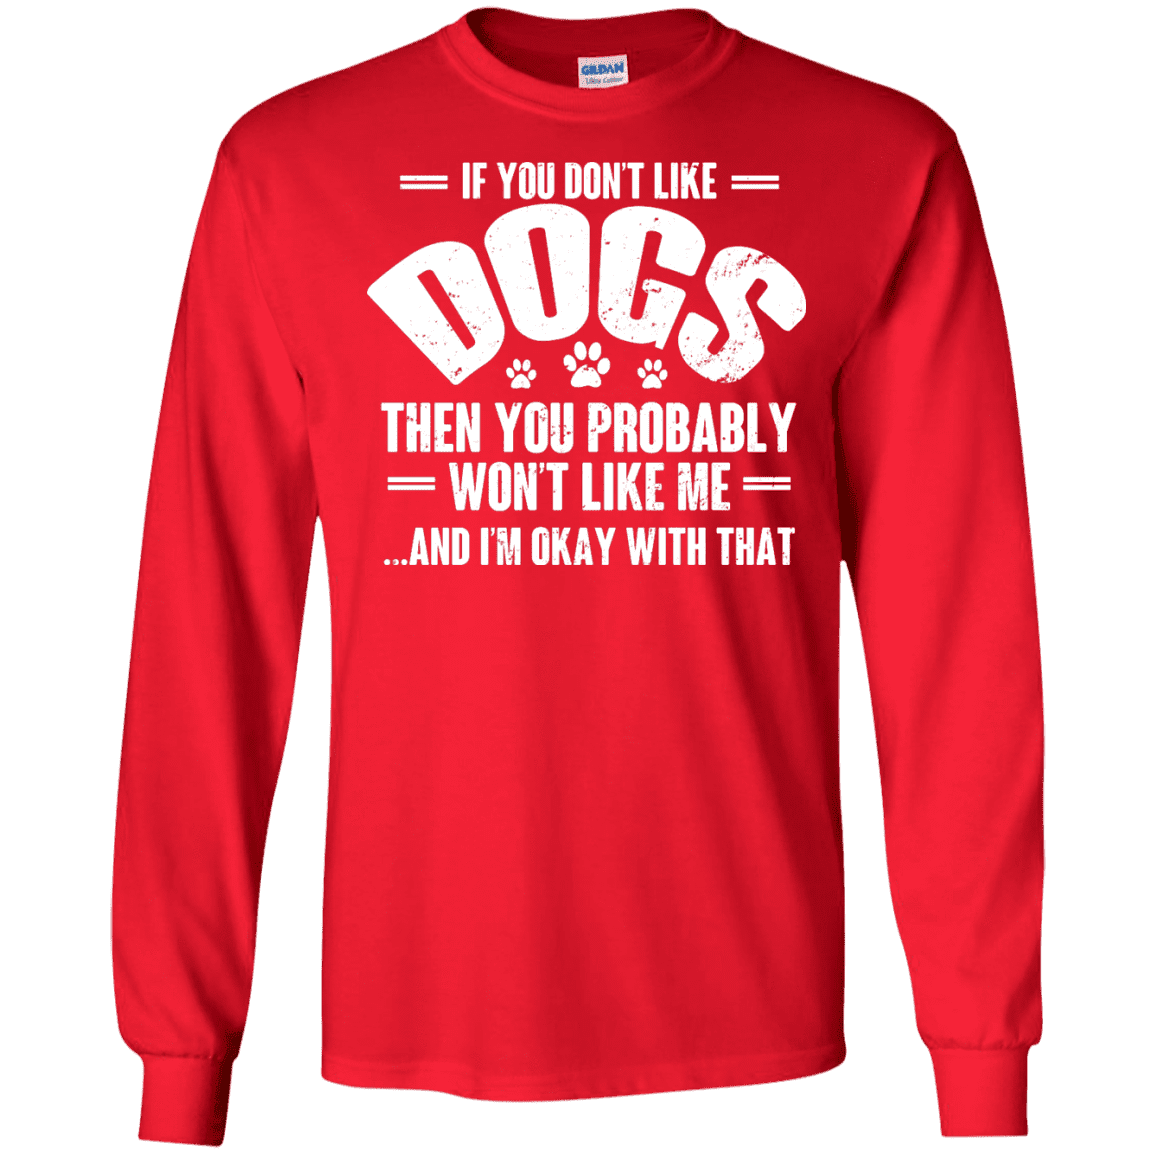 If You Don't Like Dogs - Long Sleeve T Shirt.